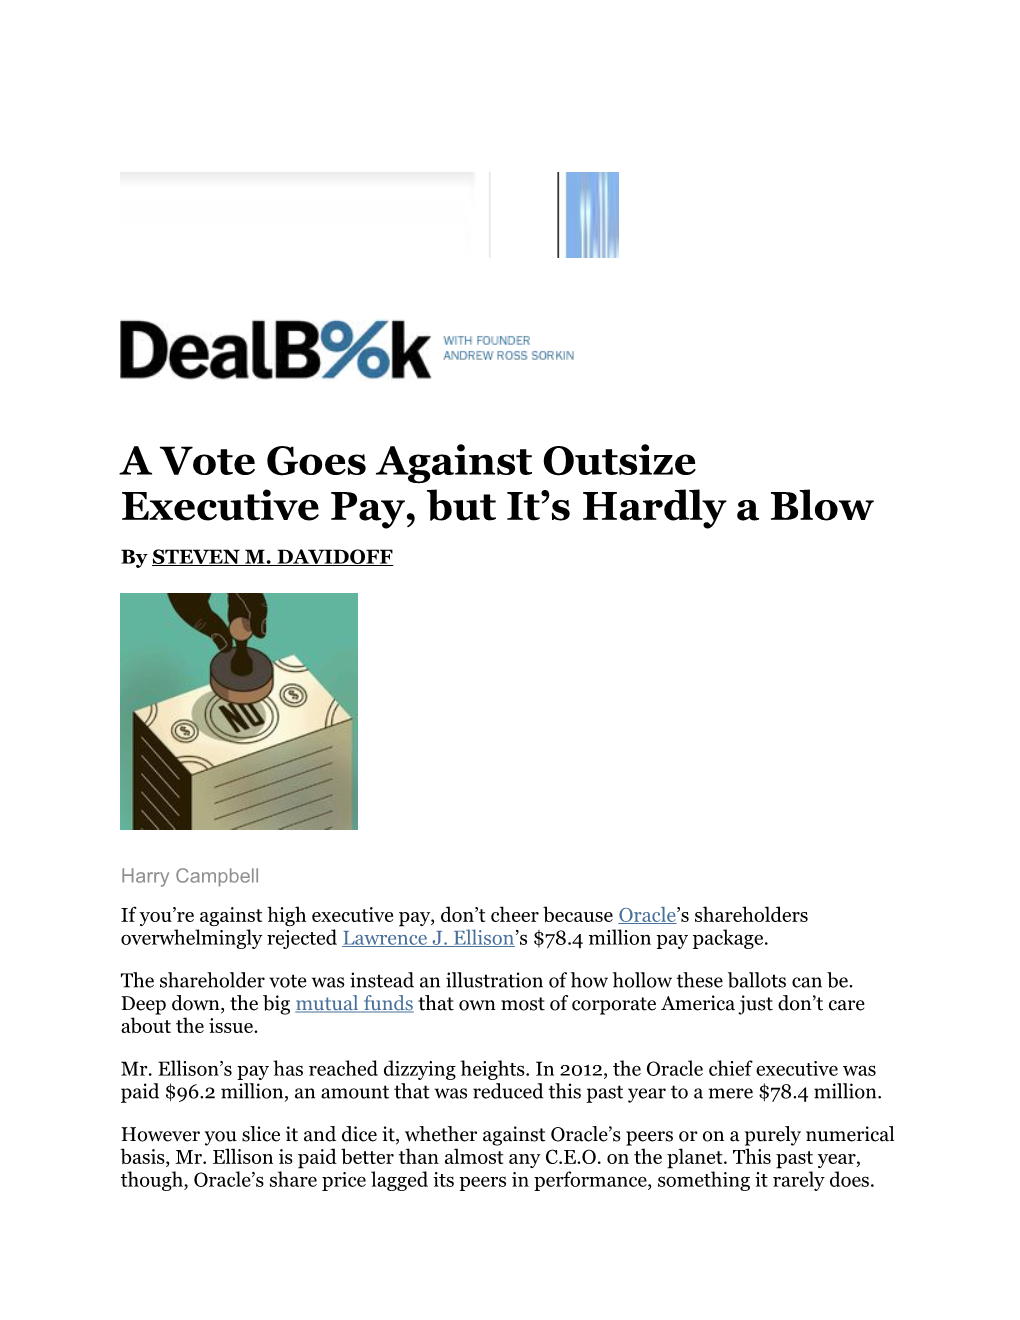 A Vote Goes Against Outsize Executive Pay, but It Shardly a Blow